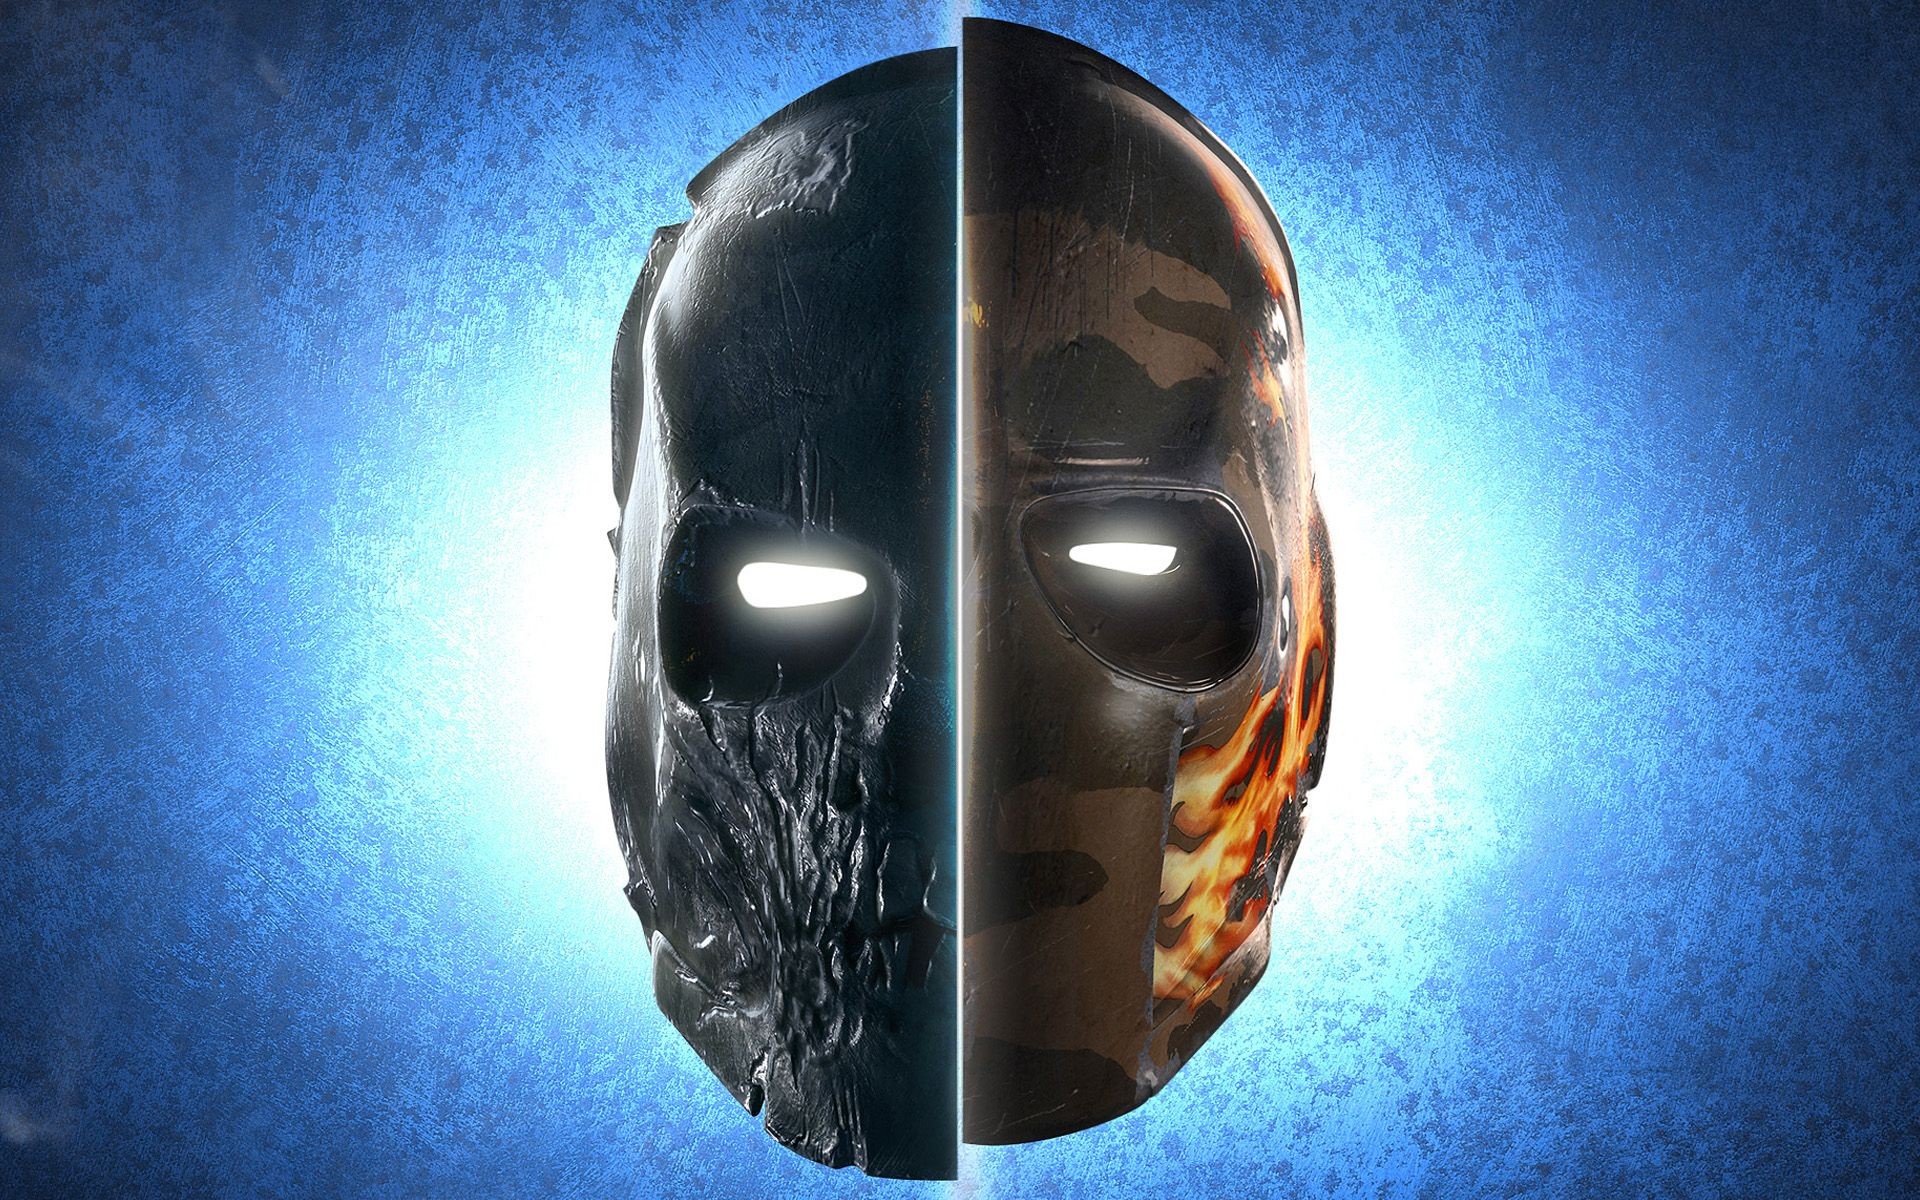 General 1920x1200 video games Army of Two mask video game art blue background